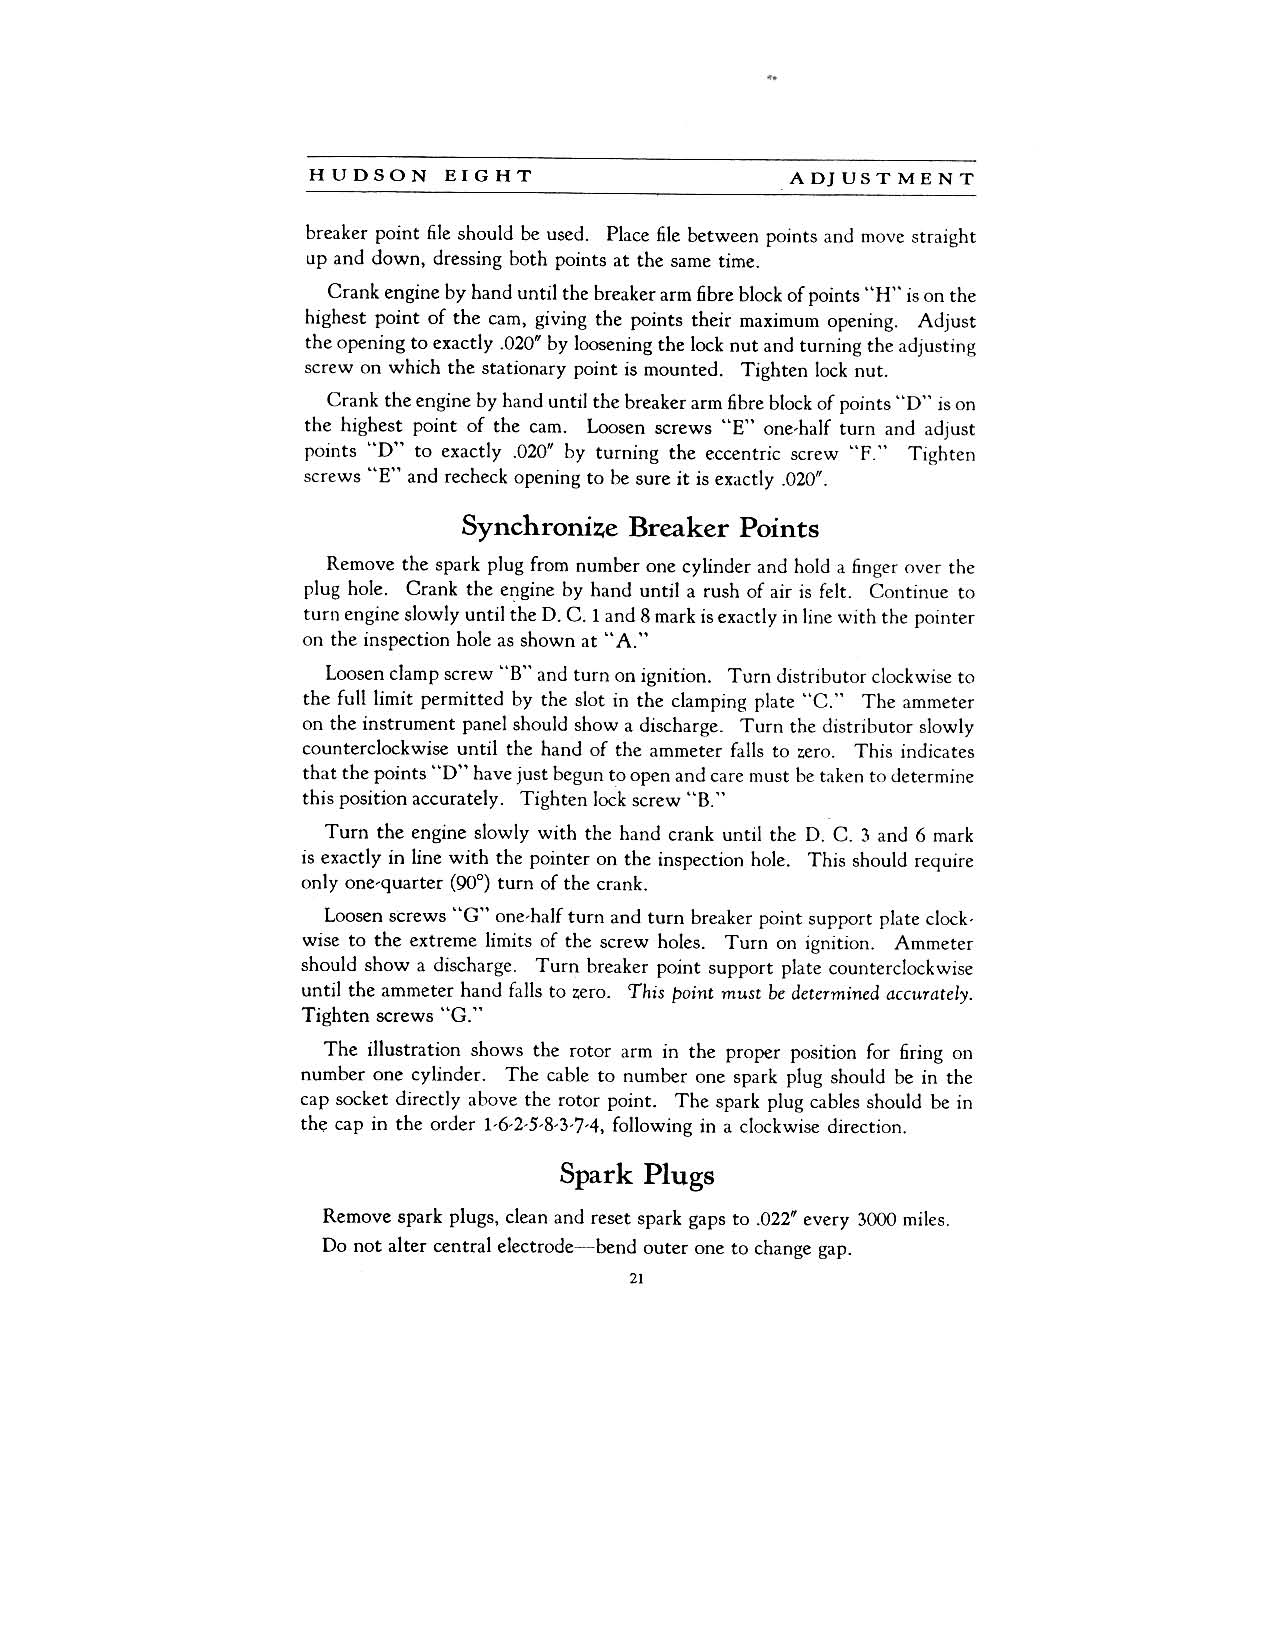 1931 Hudson 8 Instruction Book Page 3